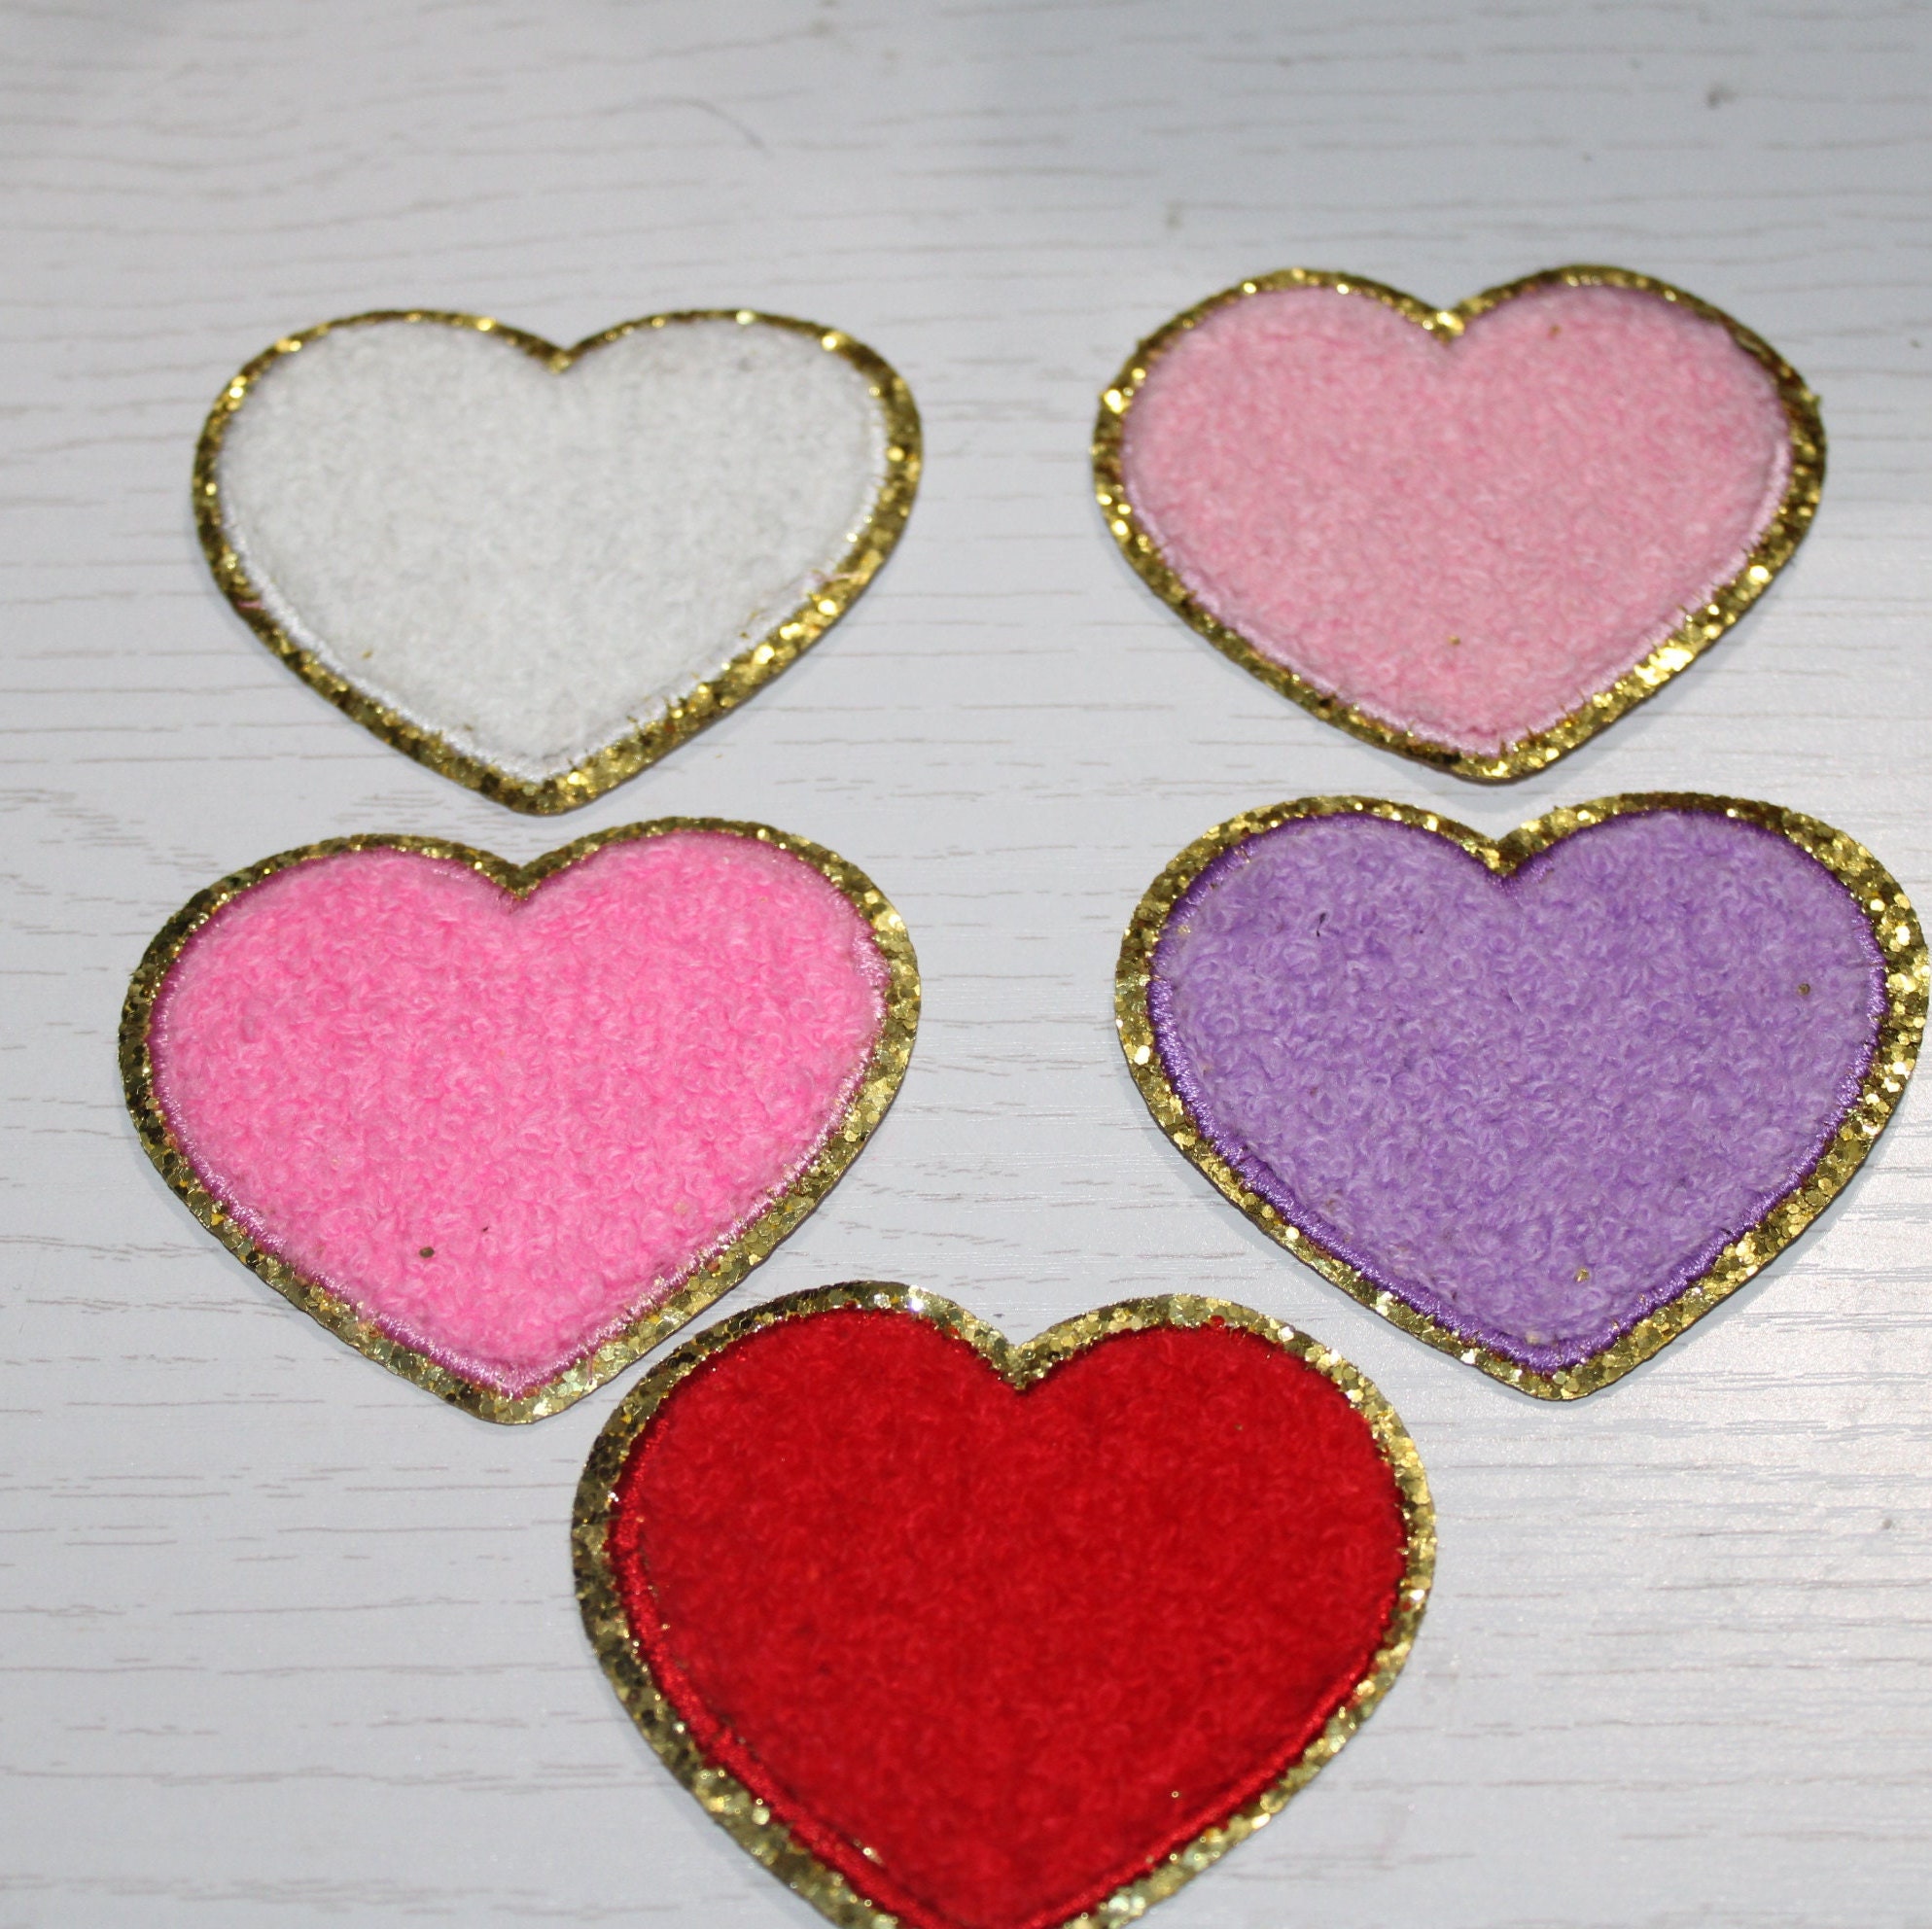 2 x 1.5 Hearts Iron On Patches 4ct by hildie & jo